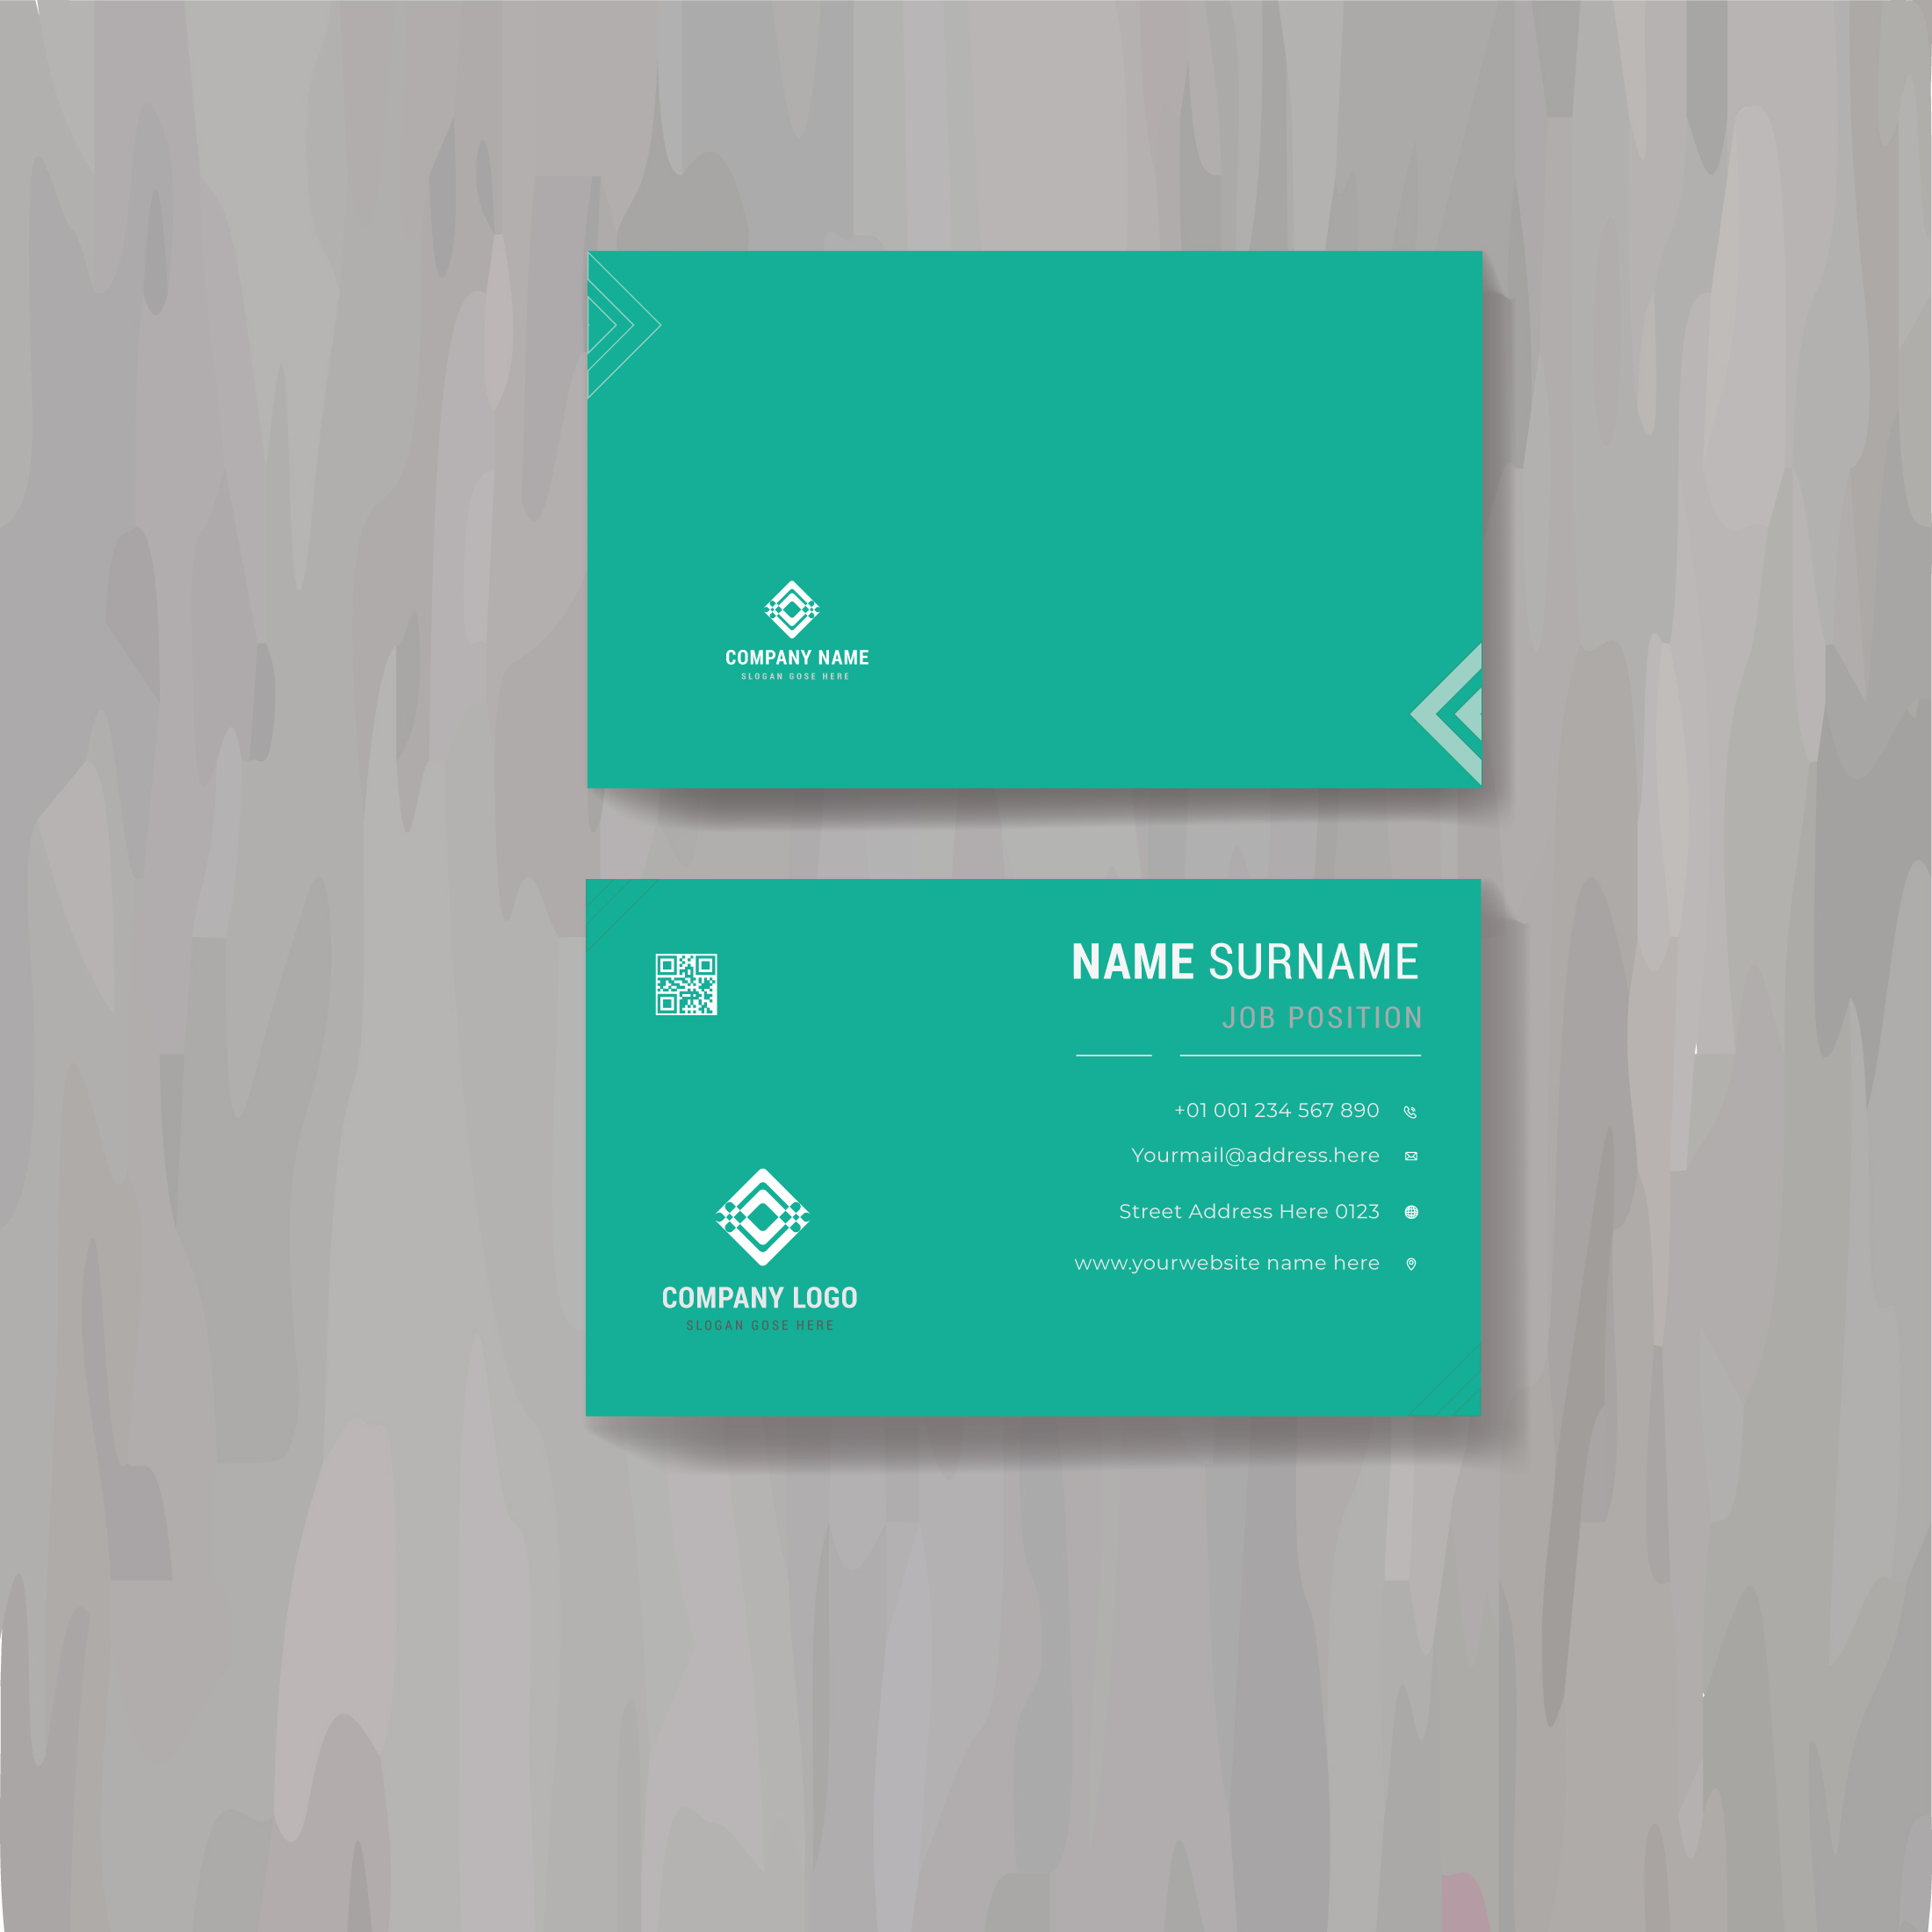 Green business card with an arrow on it.